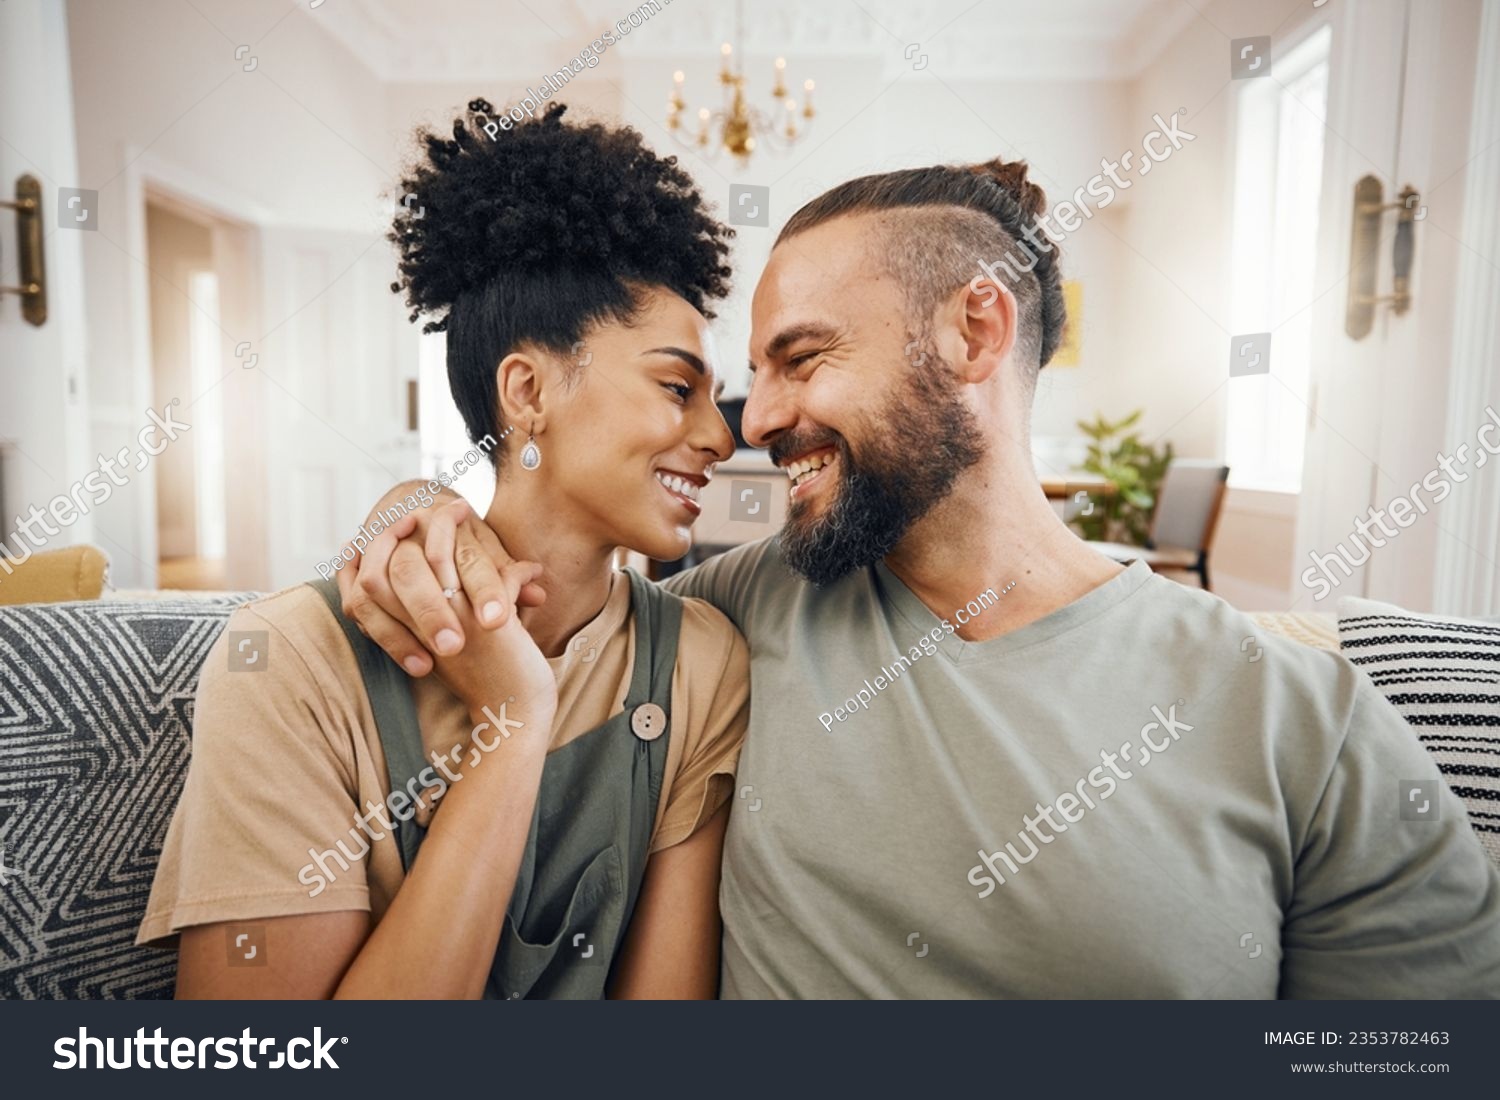 Happy, love or interracial couple on a sofa, care or commitment with relationship, weekend break or loving together. Home, man or woman on a couch, marriage or romantic with bonding, date or relax #2353782463